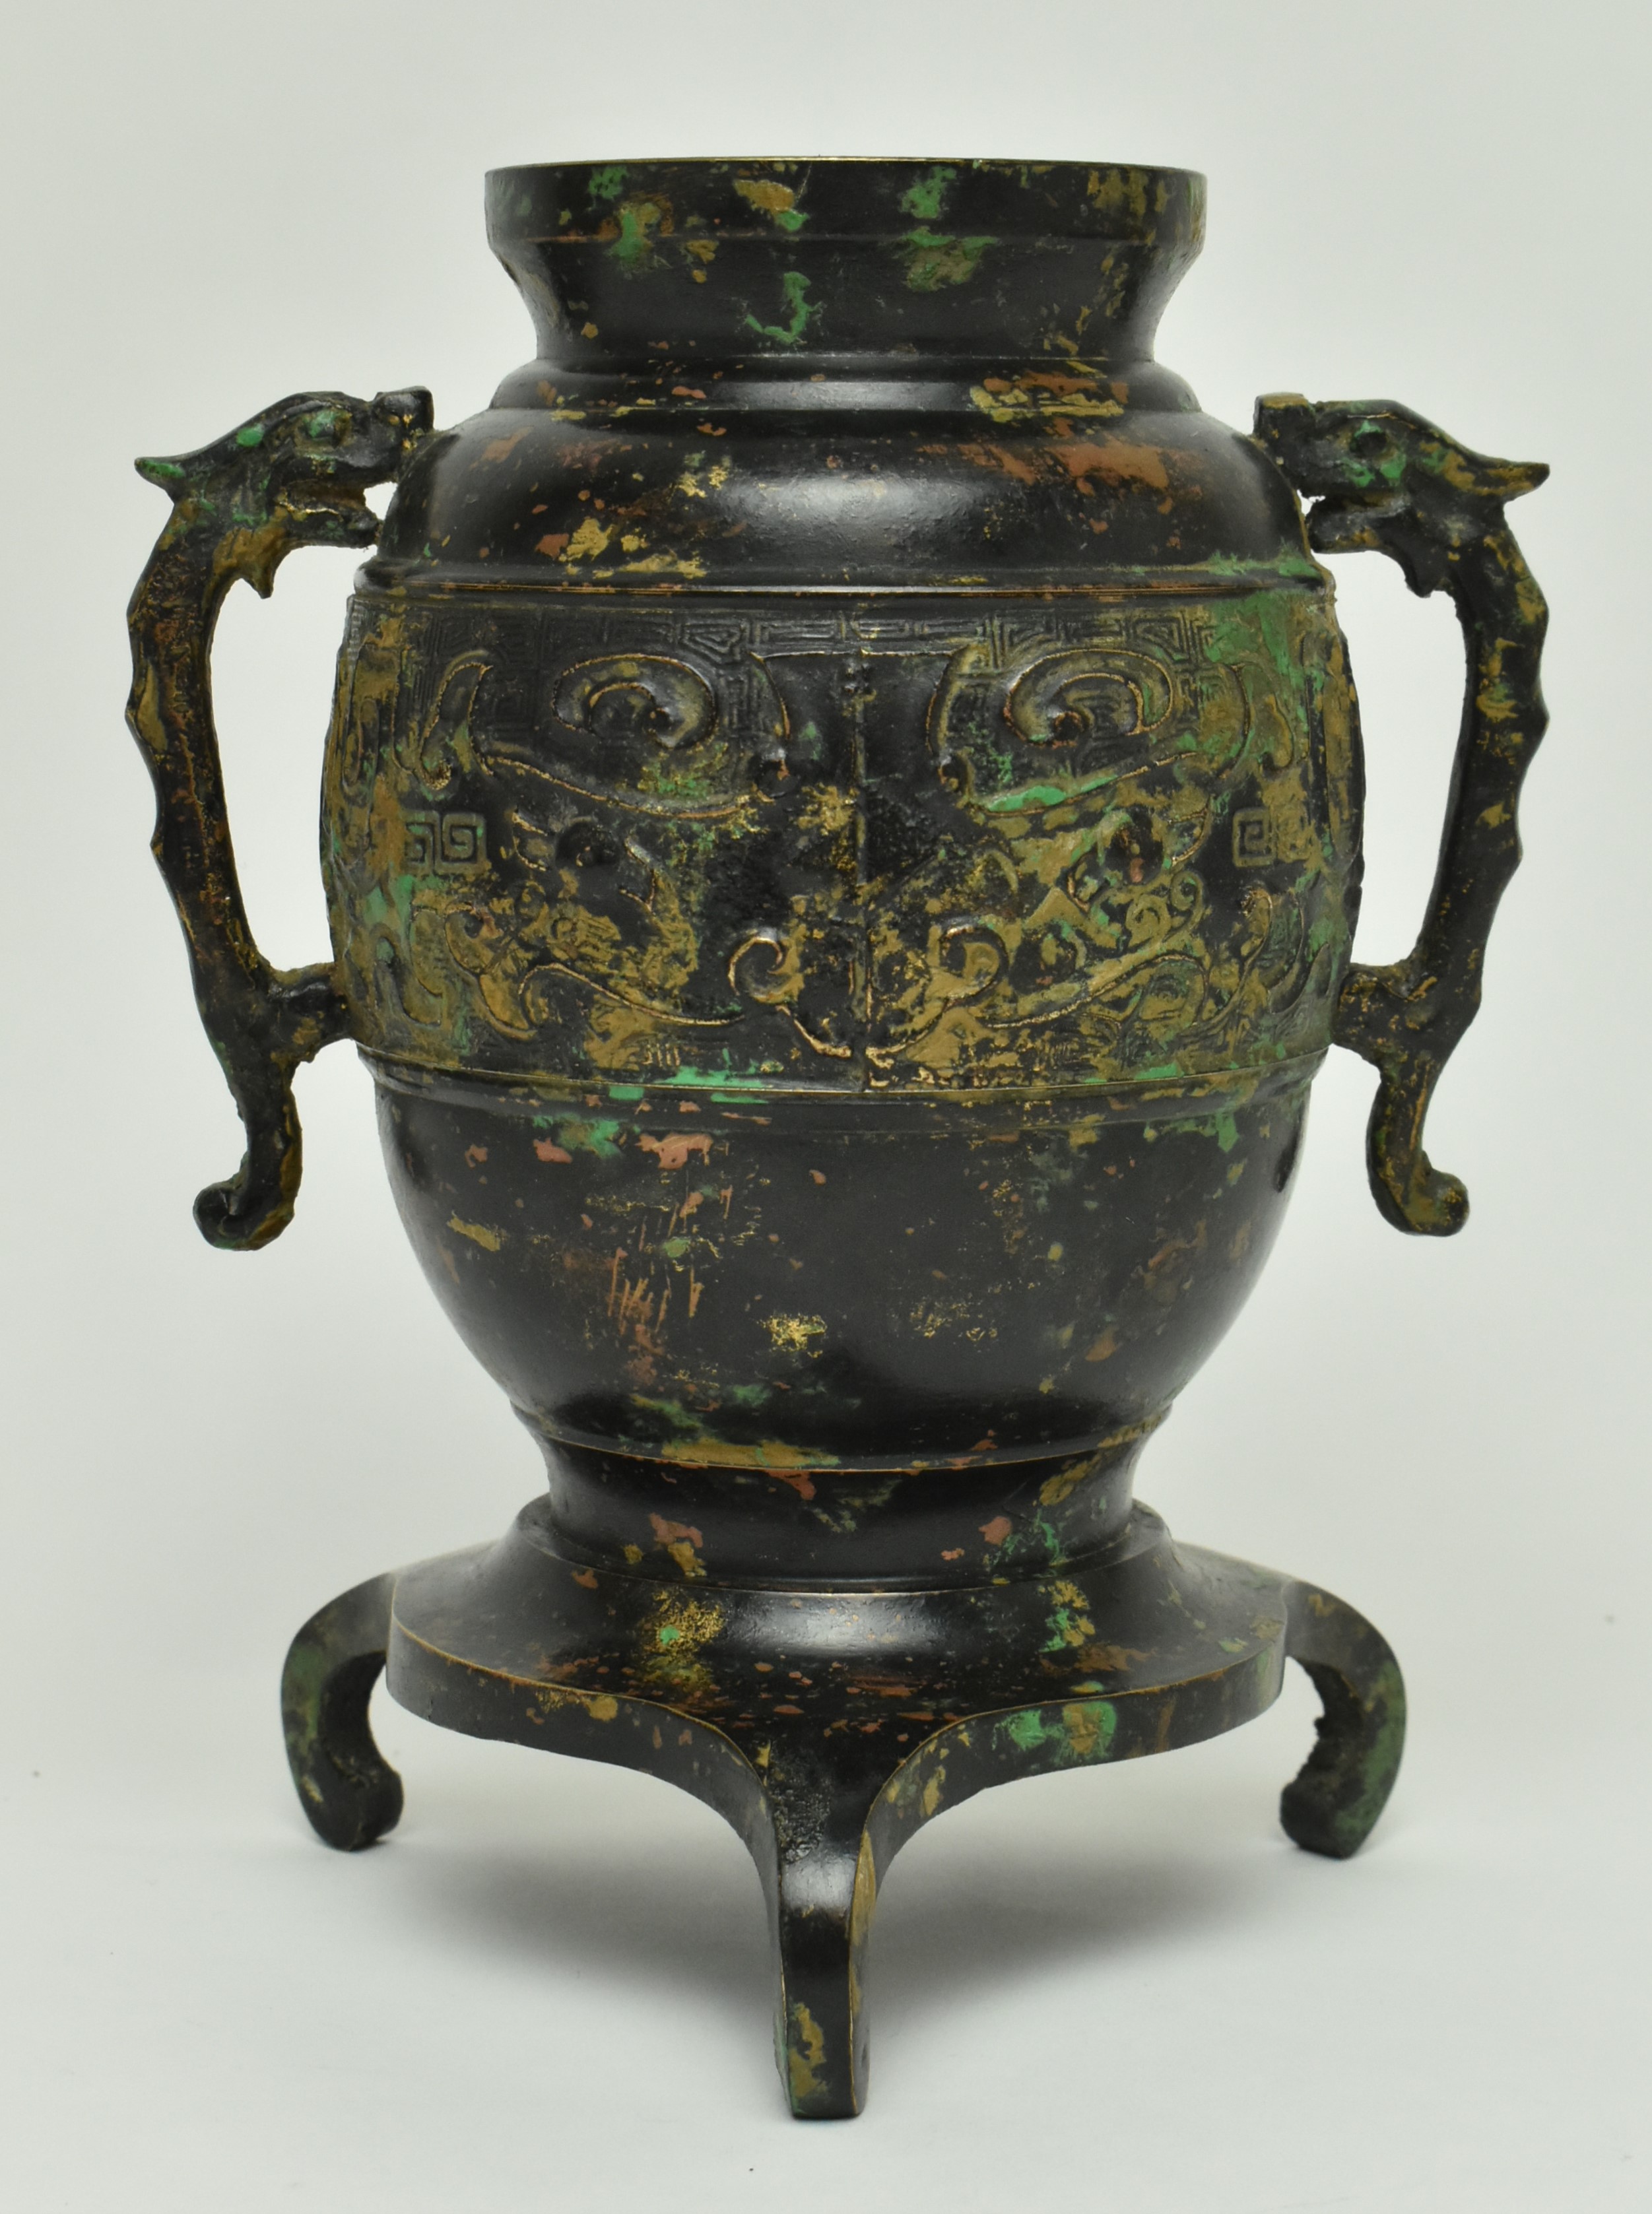 TWO JAPANESE BRONZE PIECES "DRAGON" CENSER AND PLANT POT - Image 10 of 12